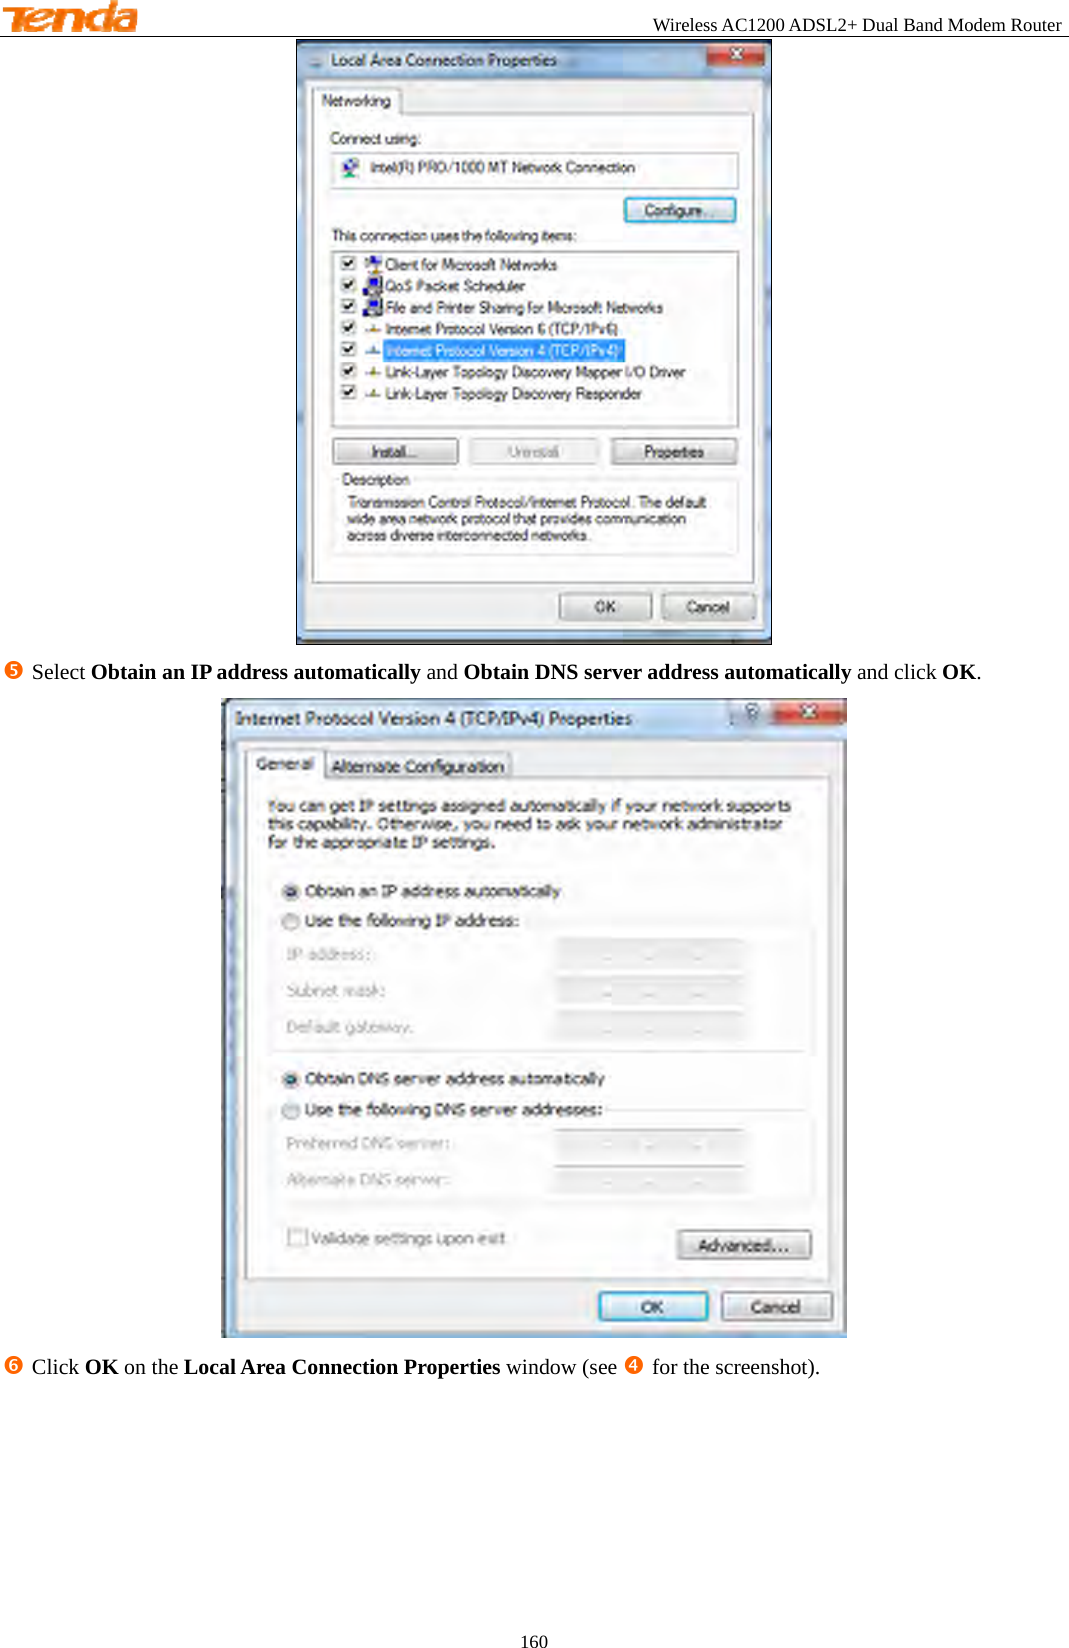                                                        Wireless AC1200 ADSL2+ Dual Band Modem Router 160   r Select Obtain an IP address automatically and Obtain DNS server address automatically and click OK.  s Click OK on the Local Area Connection Properties window (see q for the screenshot).    